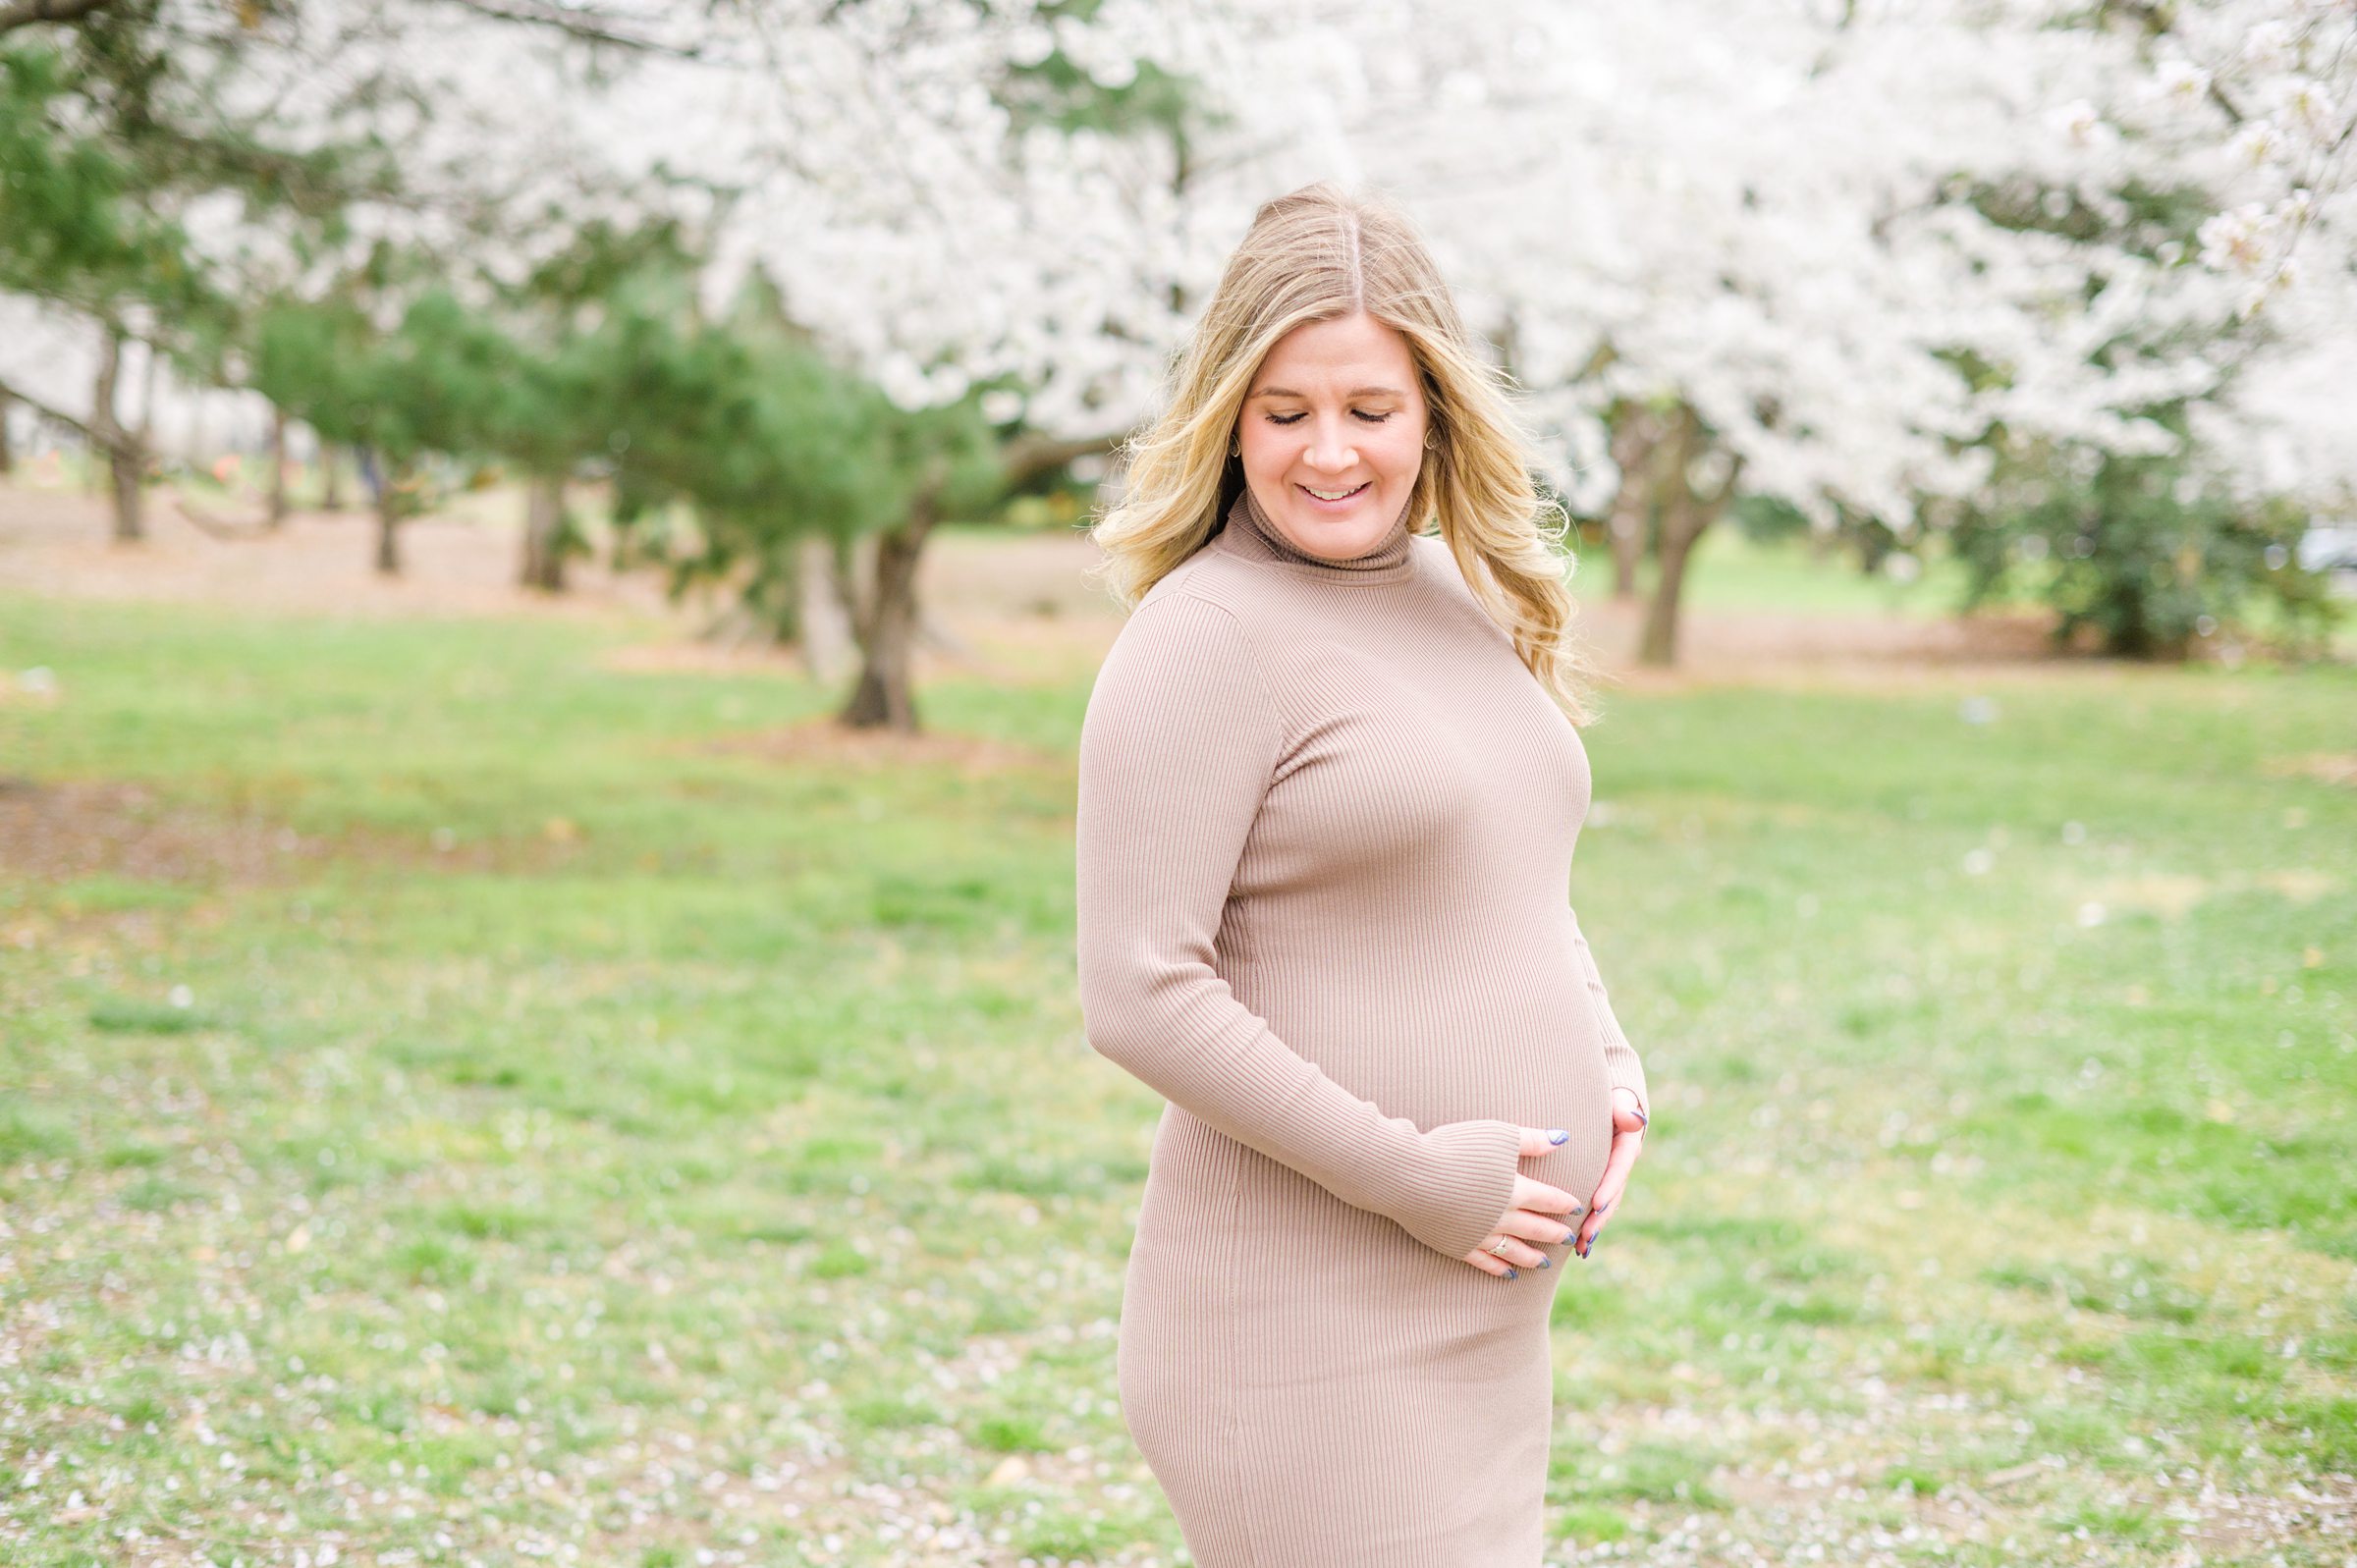 Mama-to-be poses with her bump amongst the cherry blossoms at the Washington, DC Tidal Basin during a maternity session photographed by Cait Kramer Photography